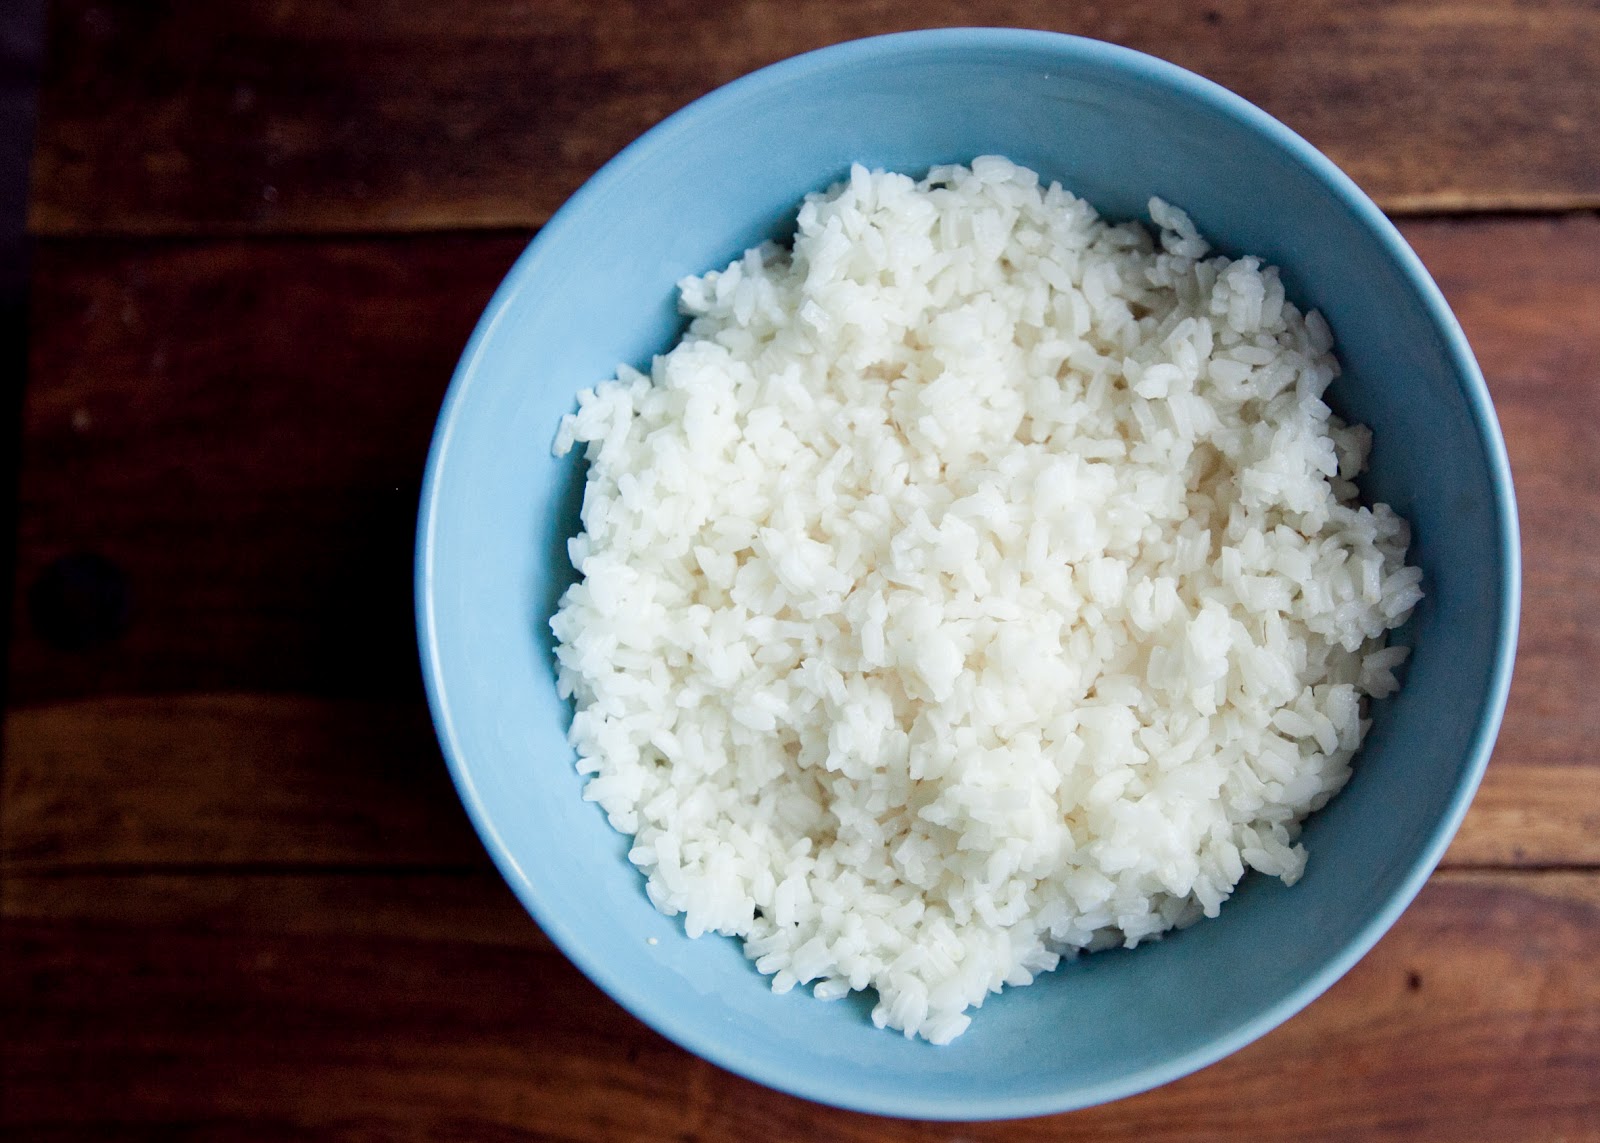 from the nato's: i can't cook rice.